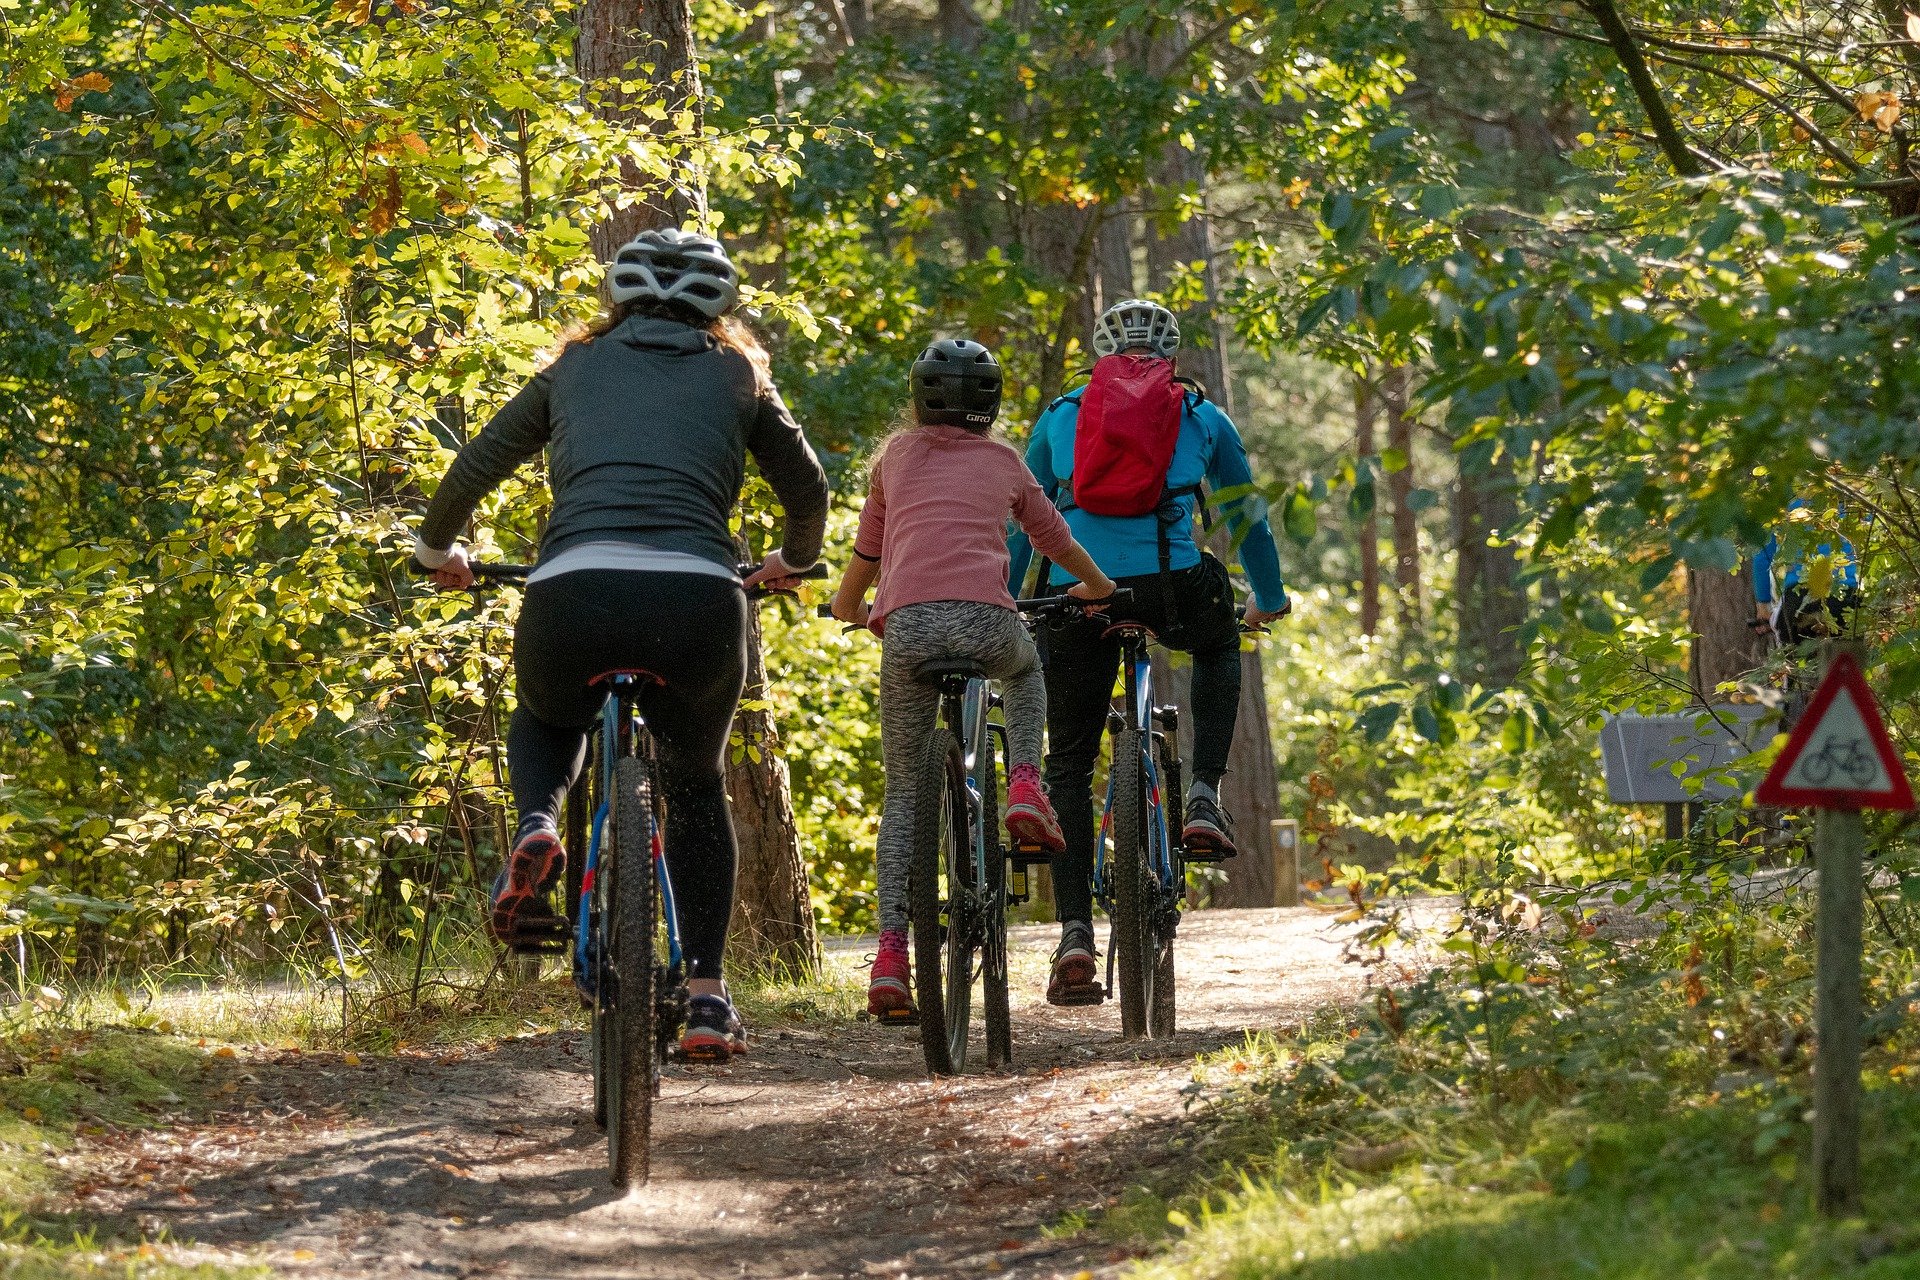 A family biking on a trail together